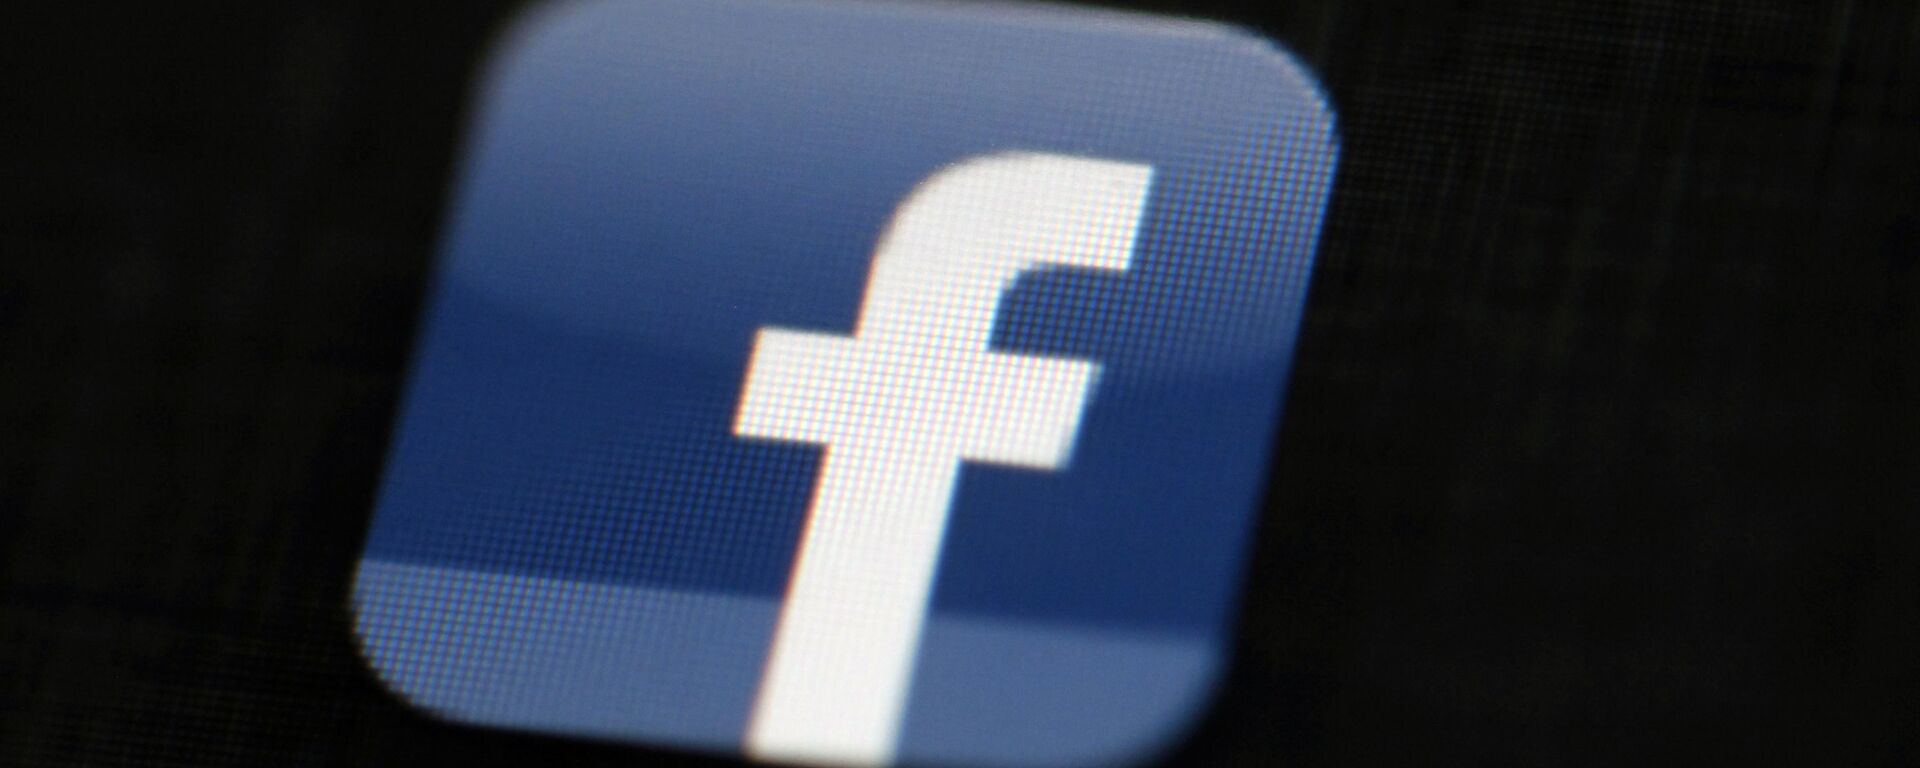 In this May 16, 2012, file photo, the Facebook logo is displayed on a mobile device in Philadelphia - Sputnik International, 1920, 24.02.2021